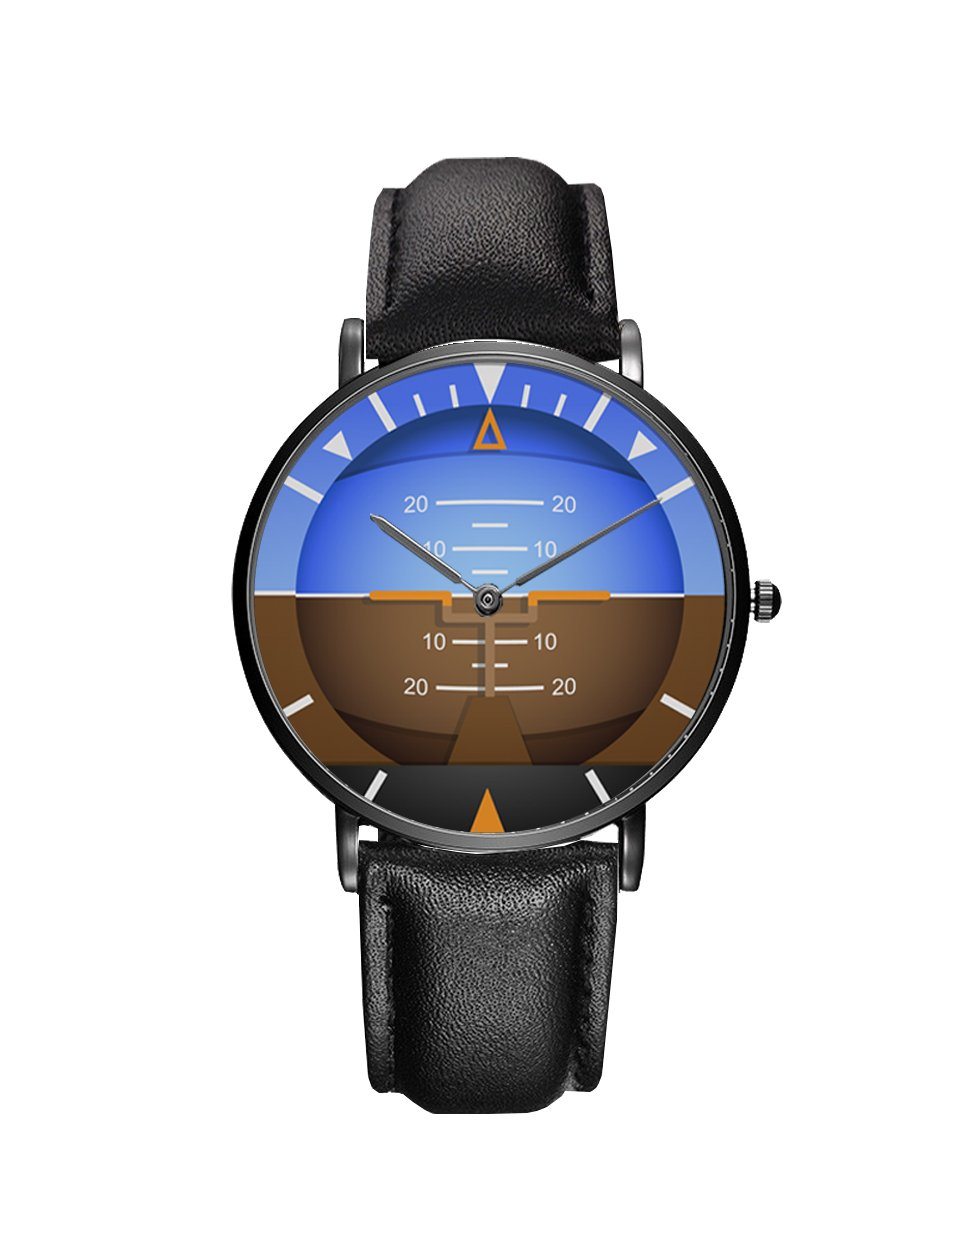 Vorsprung RS5 Gyro | Leather straps, Black stainless steel, Orange leather